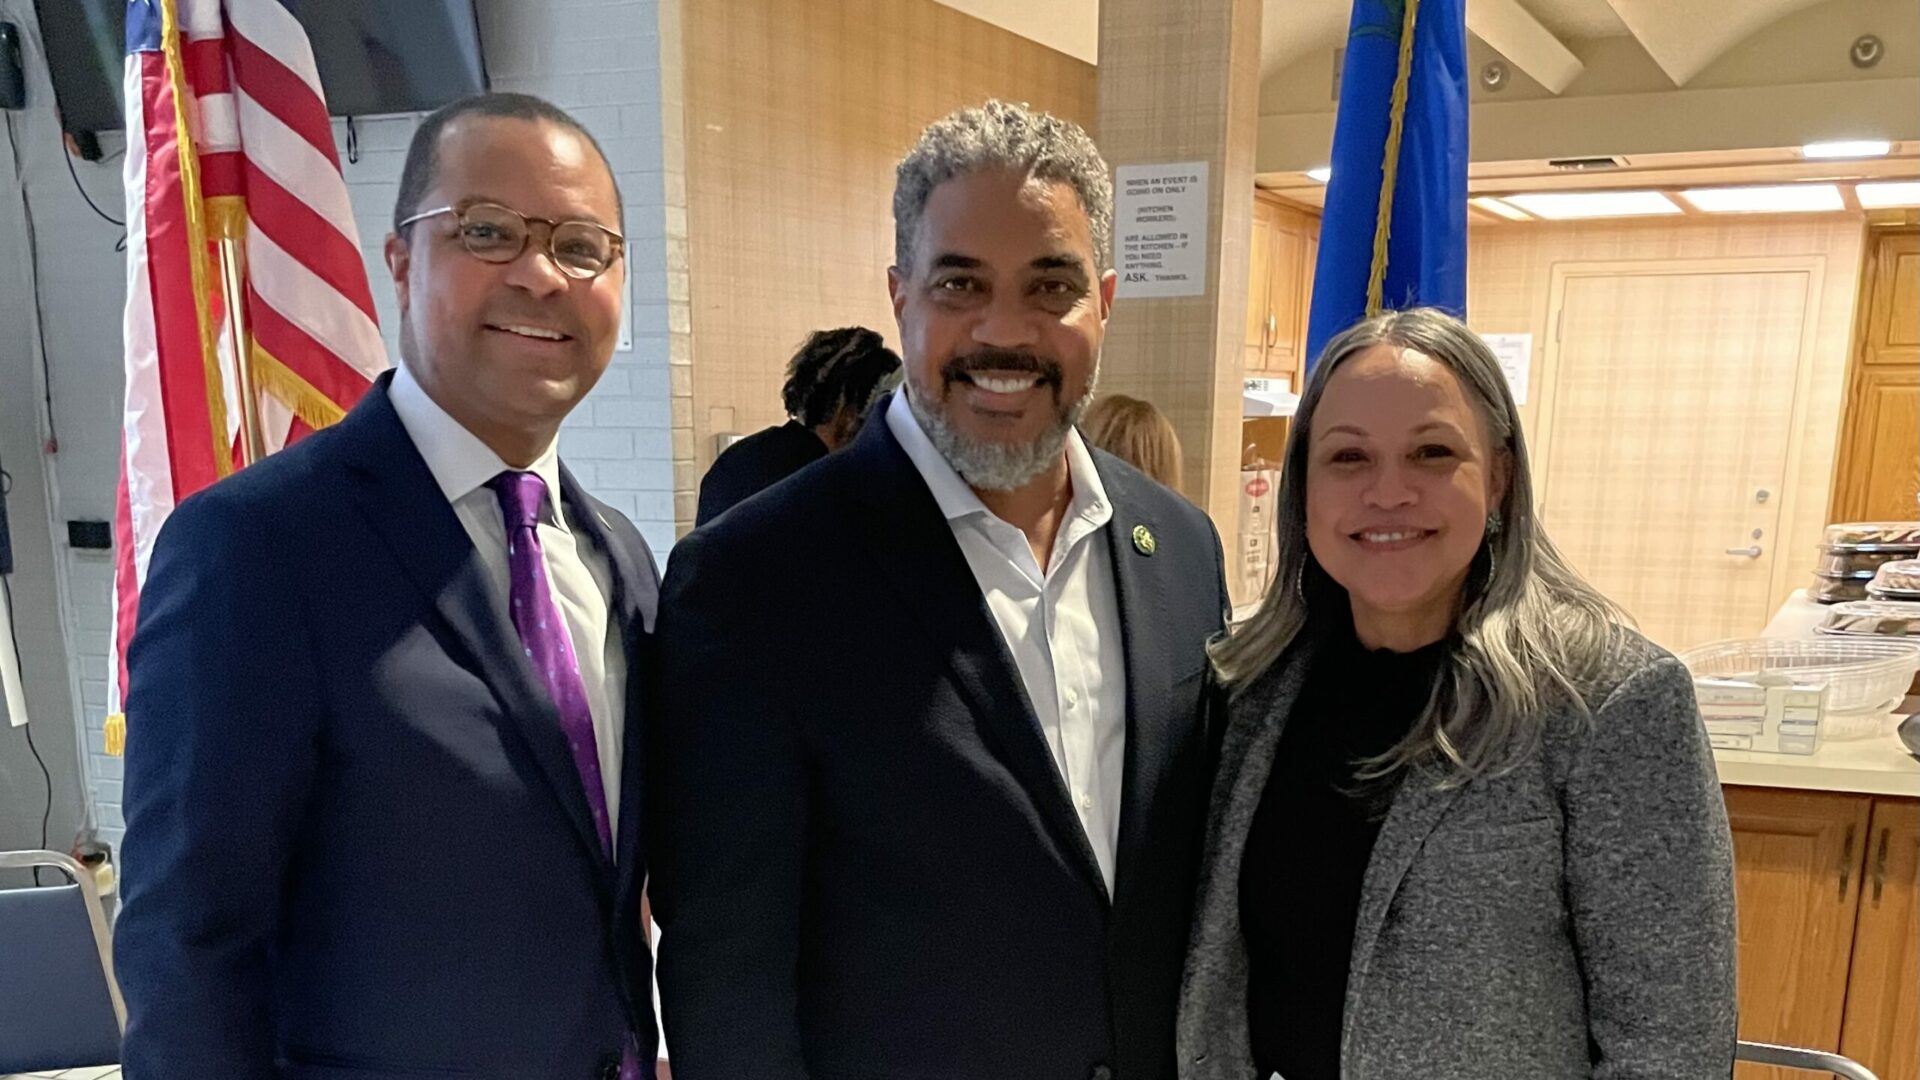 Bridging the Digital Divide with the Affordable Connectivity Program – Commissioner Starks & Rep. Horsford in Nevada